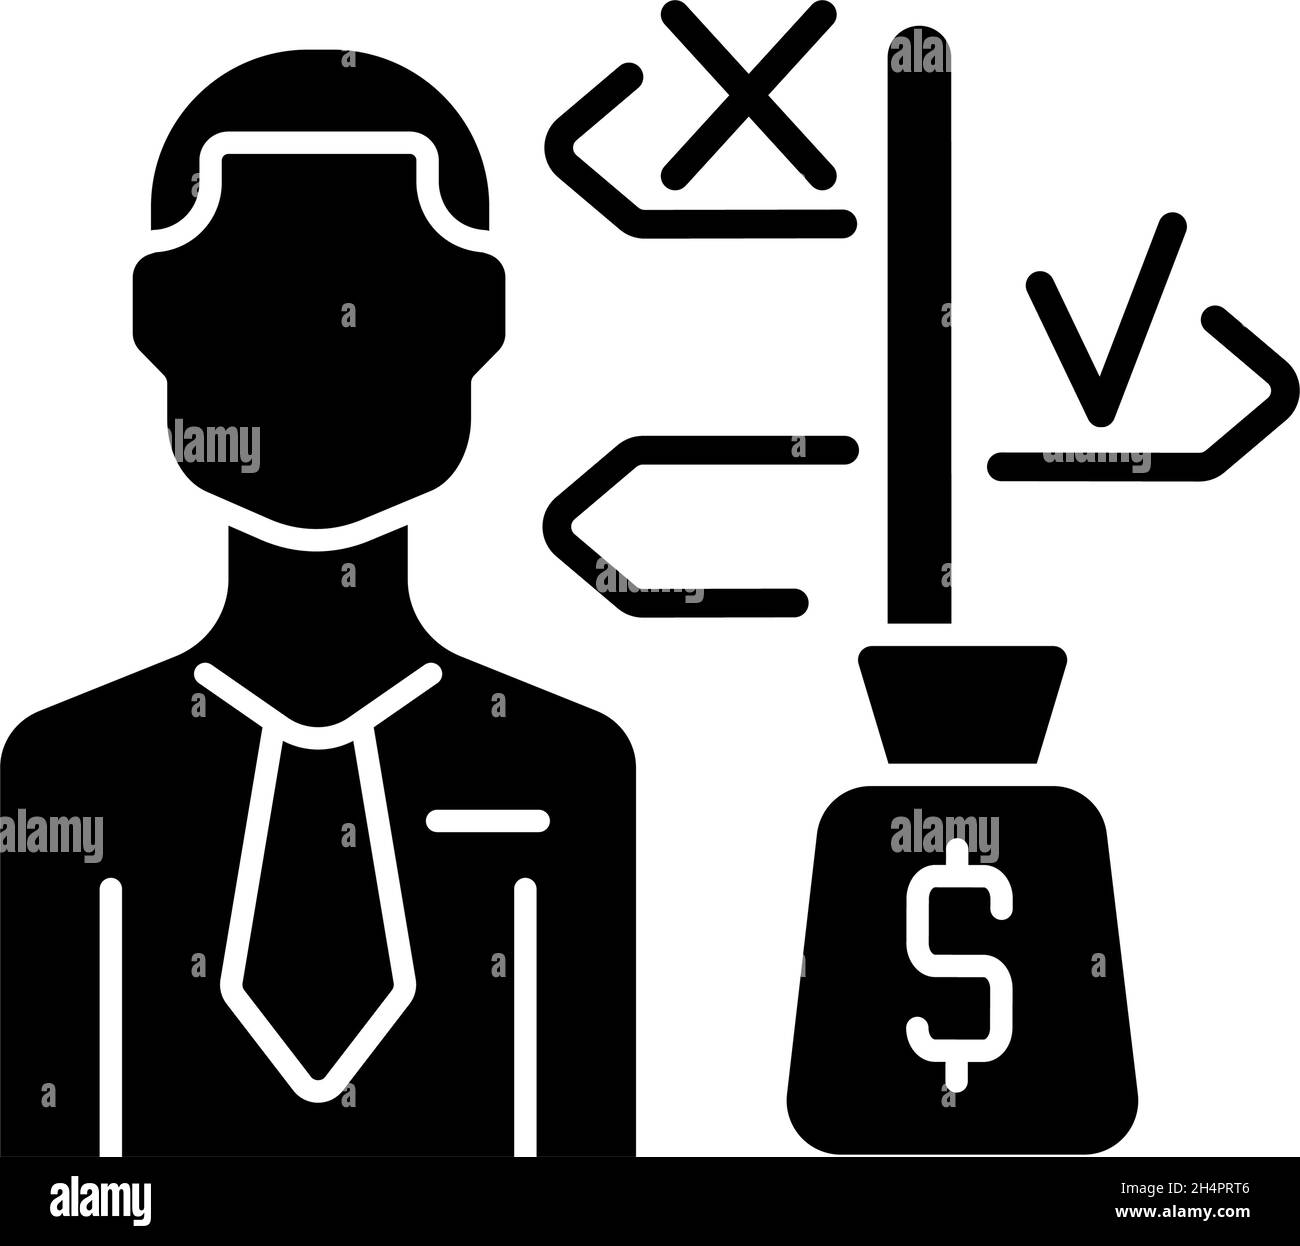 Asset manager black glyph icon Stock Vector